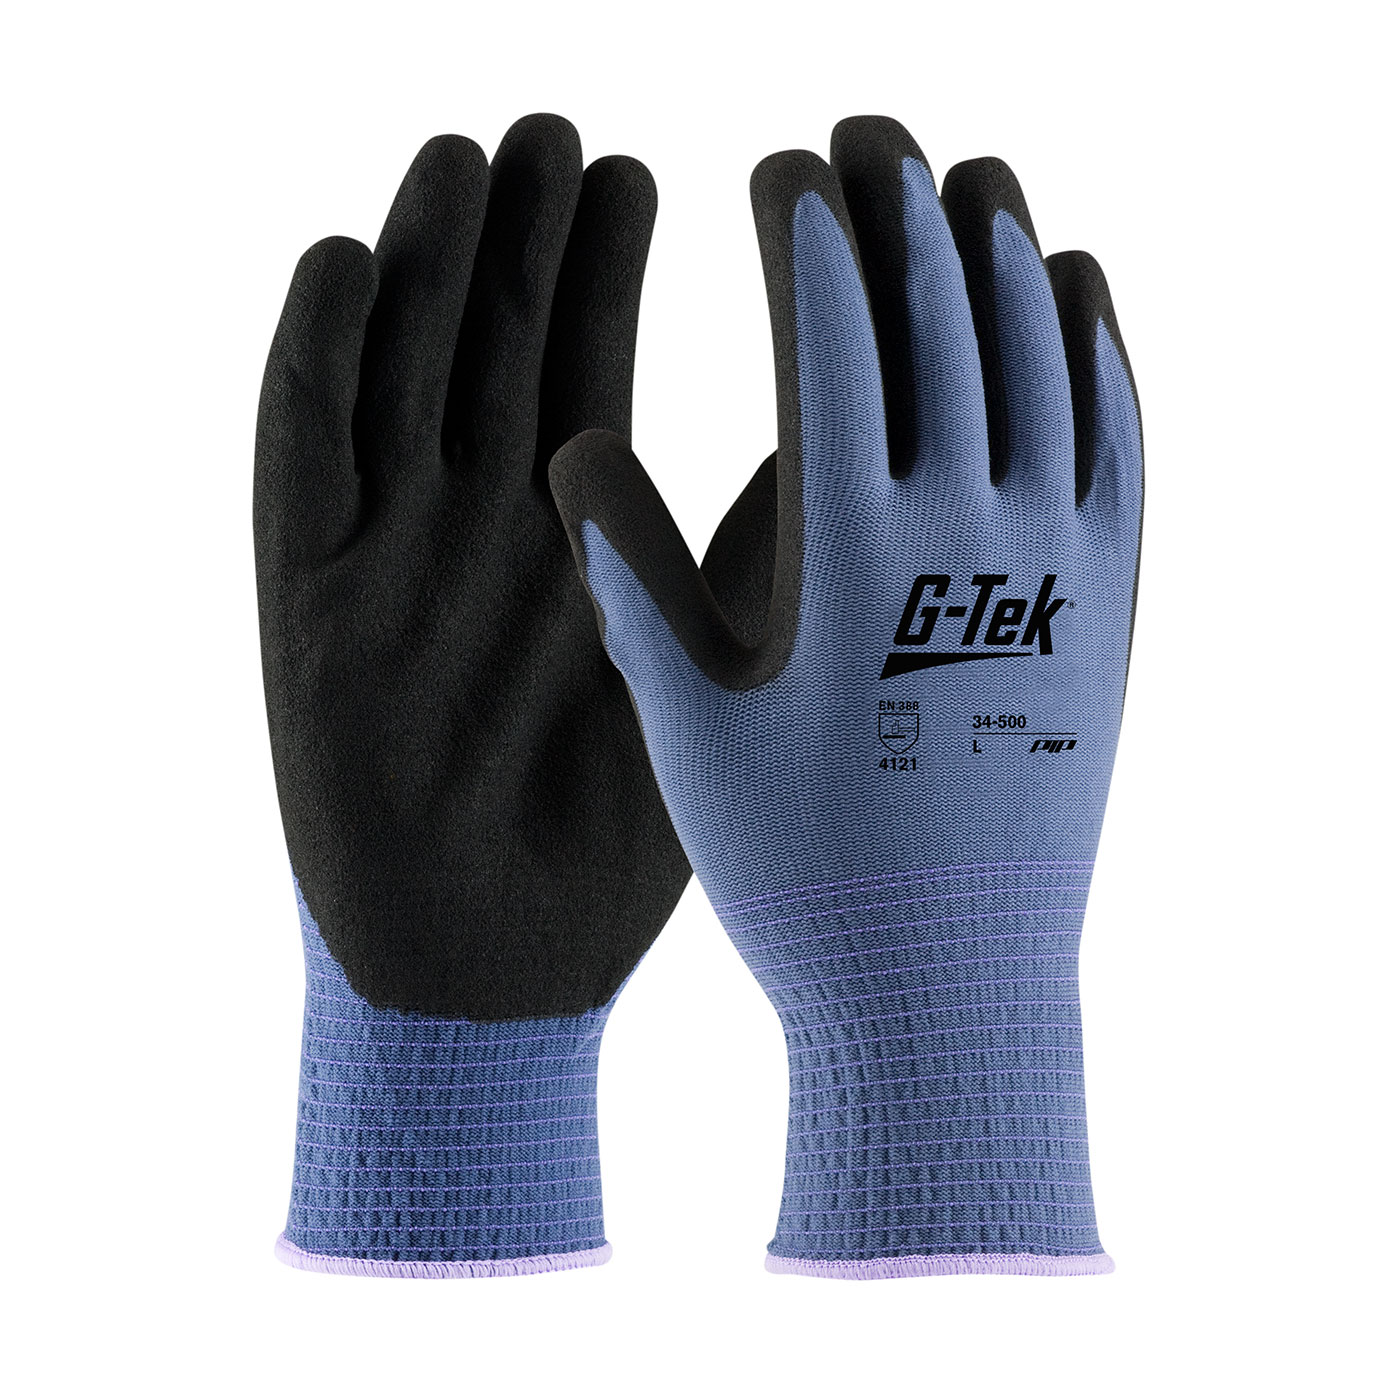 PIP 34-500/L G-Tek GP Seamless Knit Nylon Glove with Nitrile Coated MicroSurface Grip on Palm & Fingers - 13 Gauge - Large PID-34 500 L